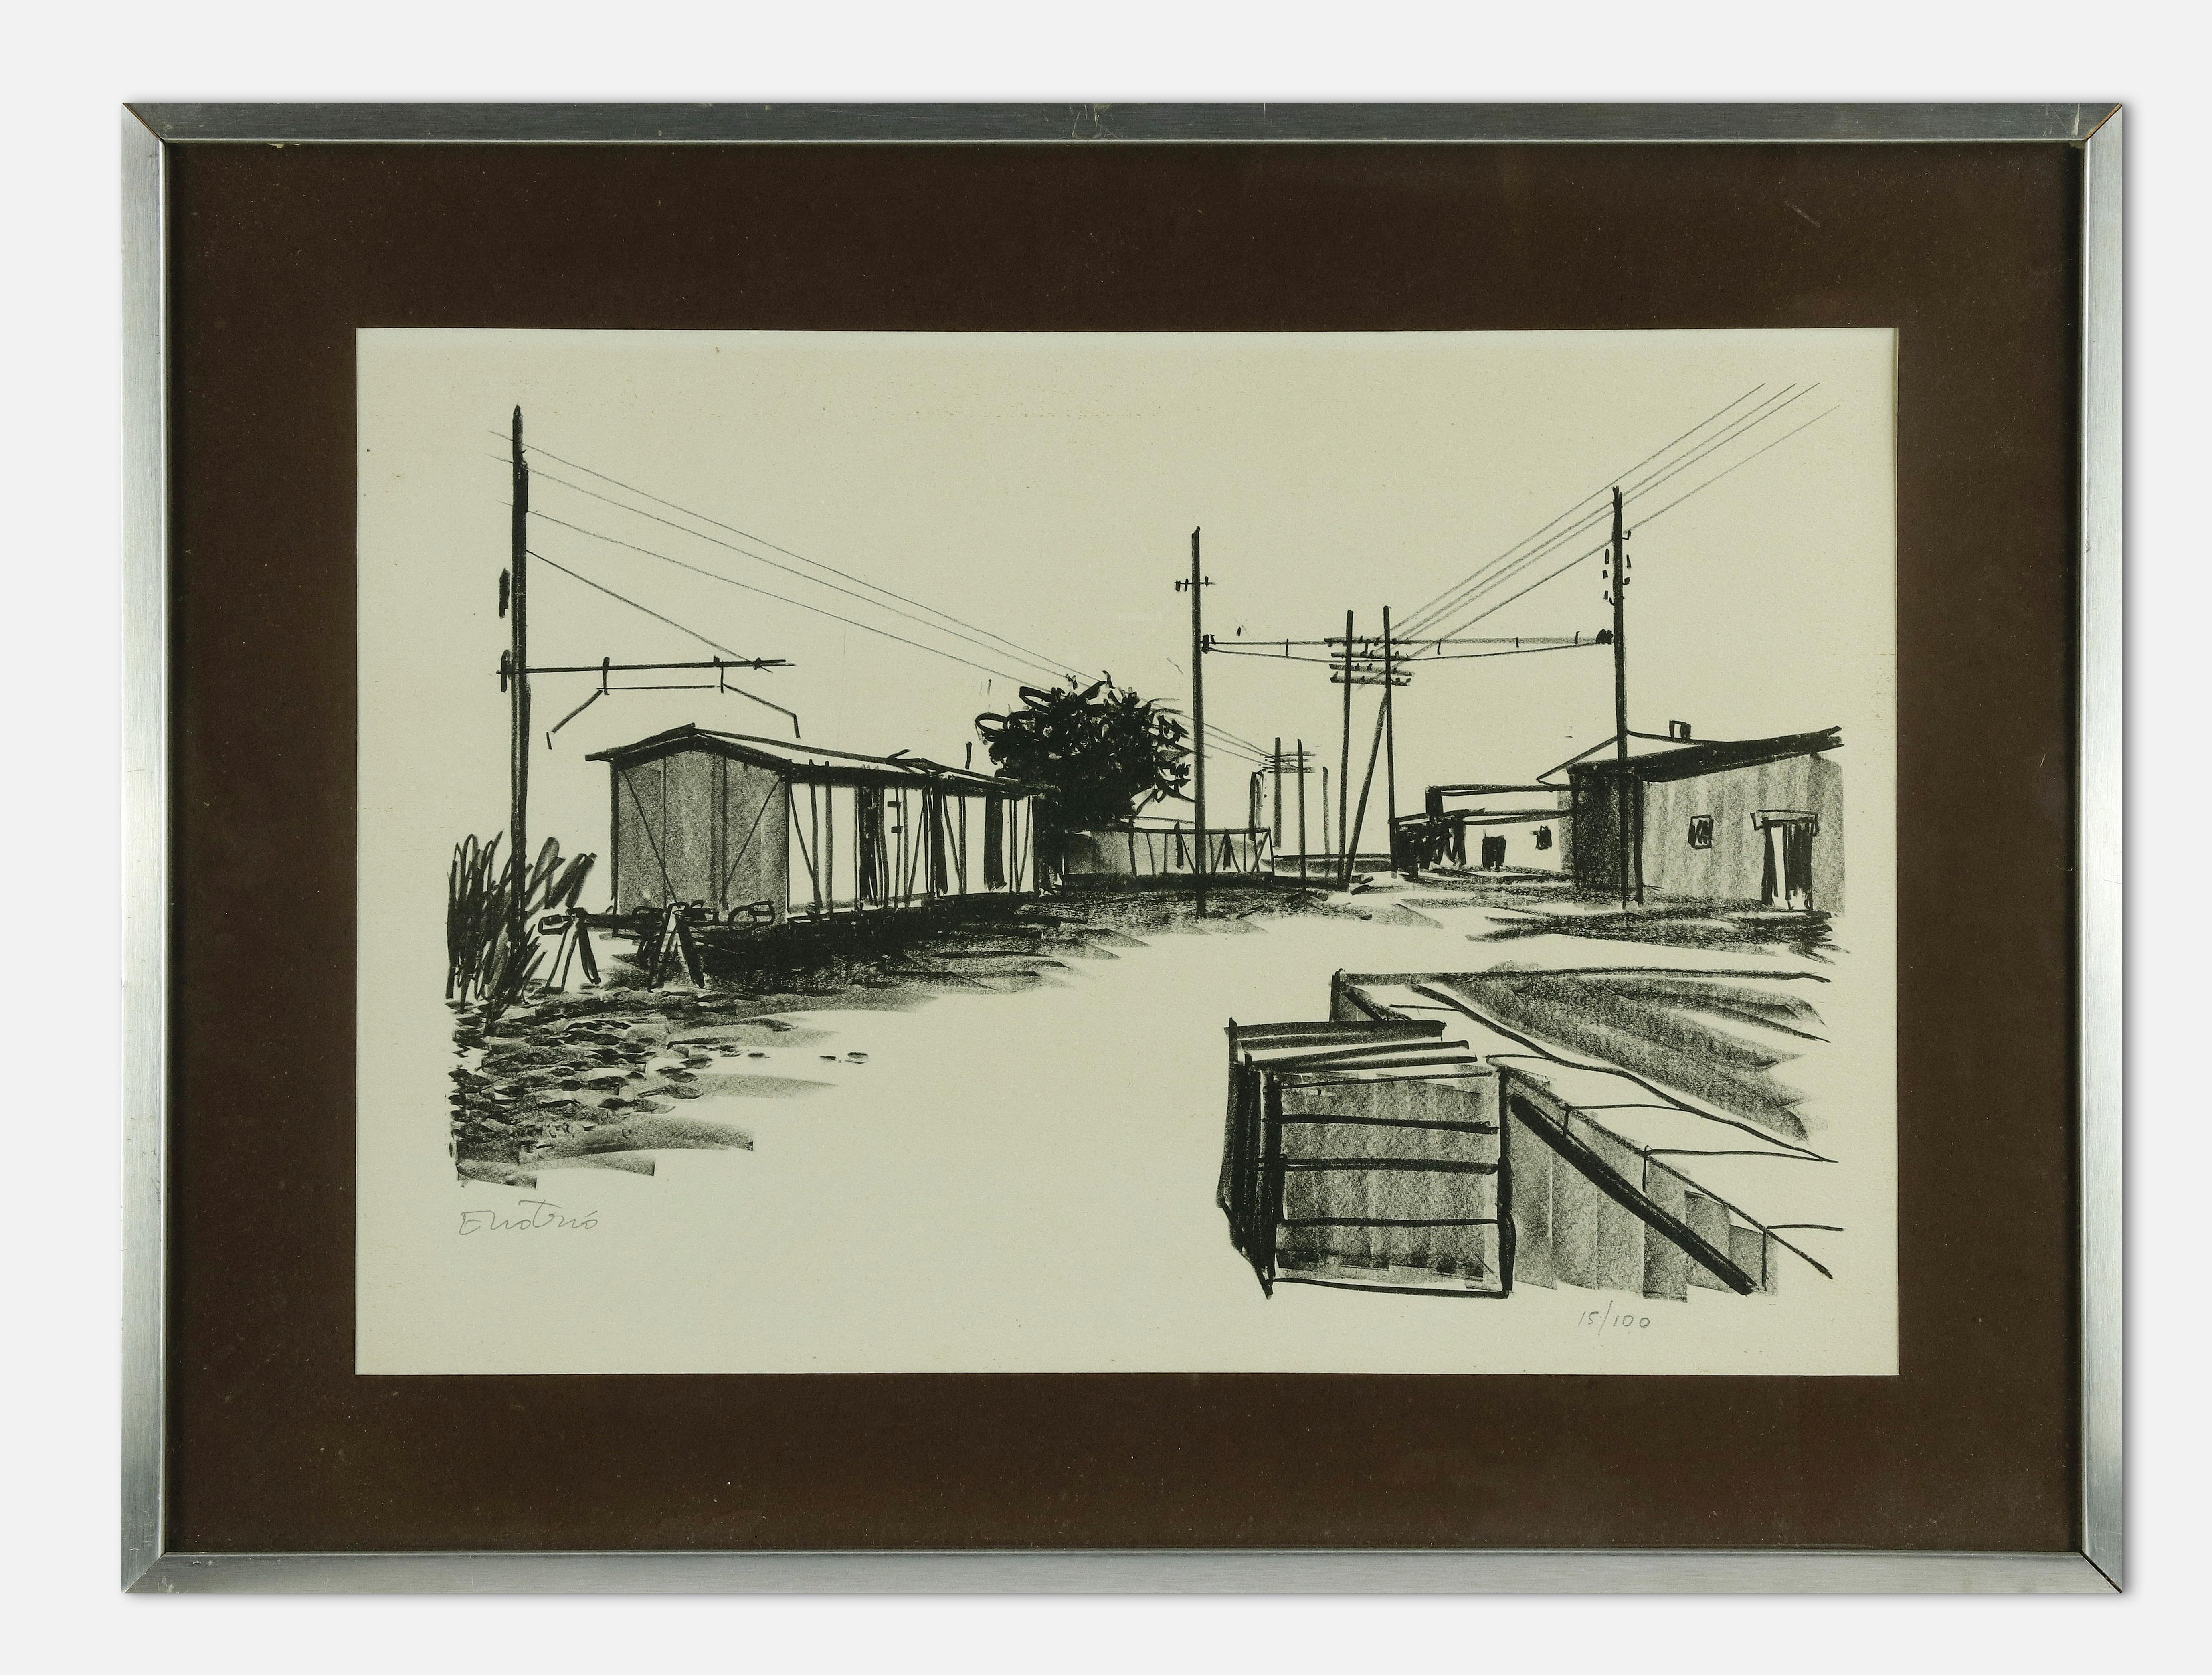 Urban landscape is an original modern artwork realized by Enotrio Pugliese in the mid-20th Century.

Black and white lithograph.

Hand signed and numbered on the lower margin.

Edition of 15/100

Includes frame: 63 x 2.5 x 47 cm